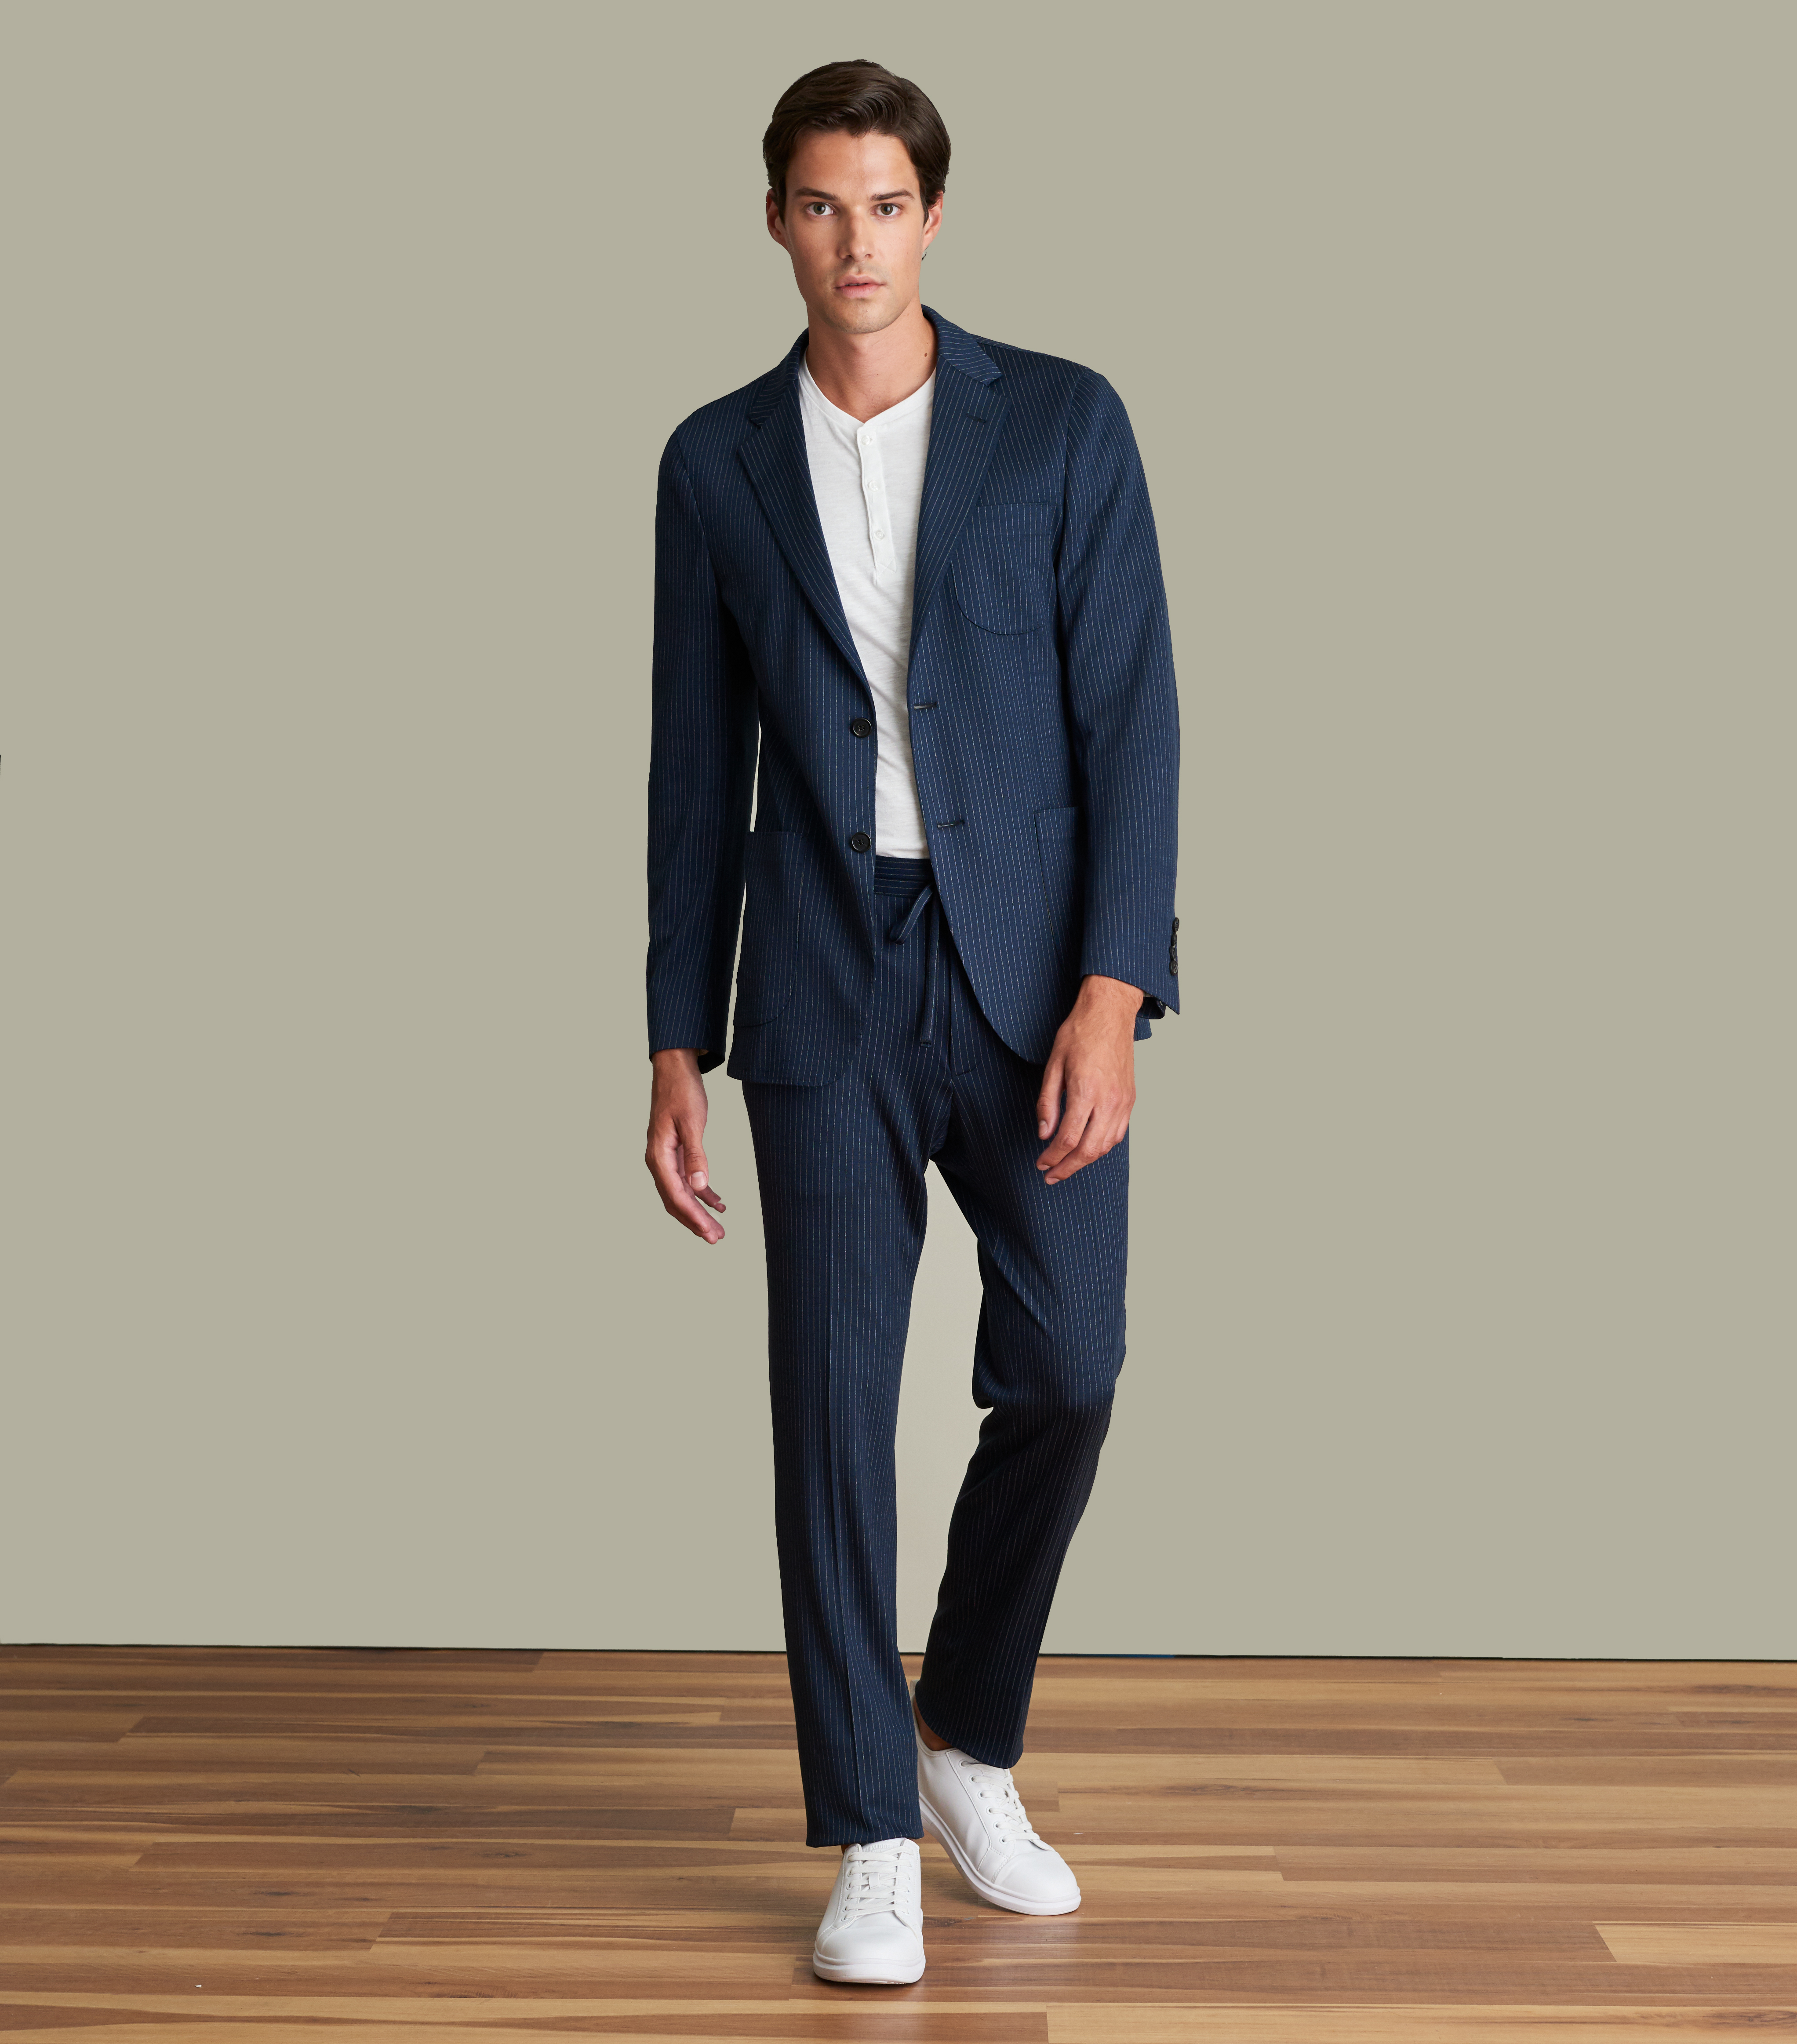 Vue collection from Samuelsohn.